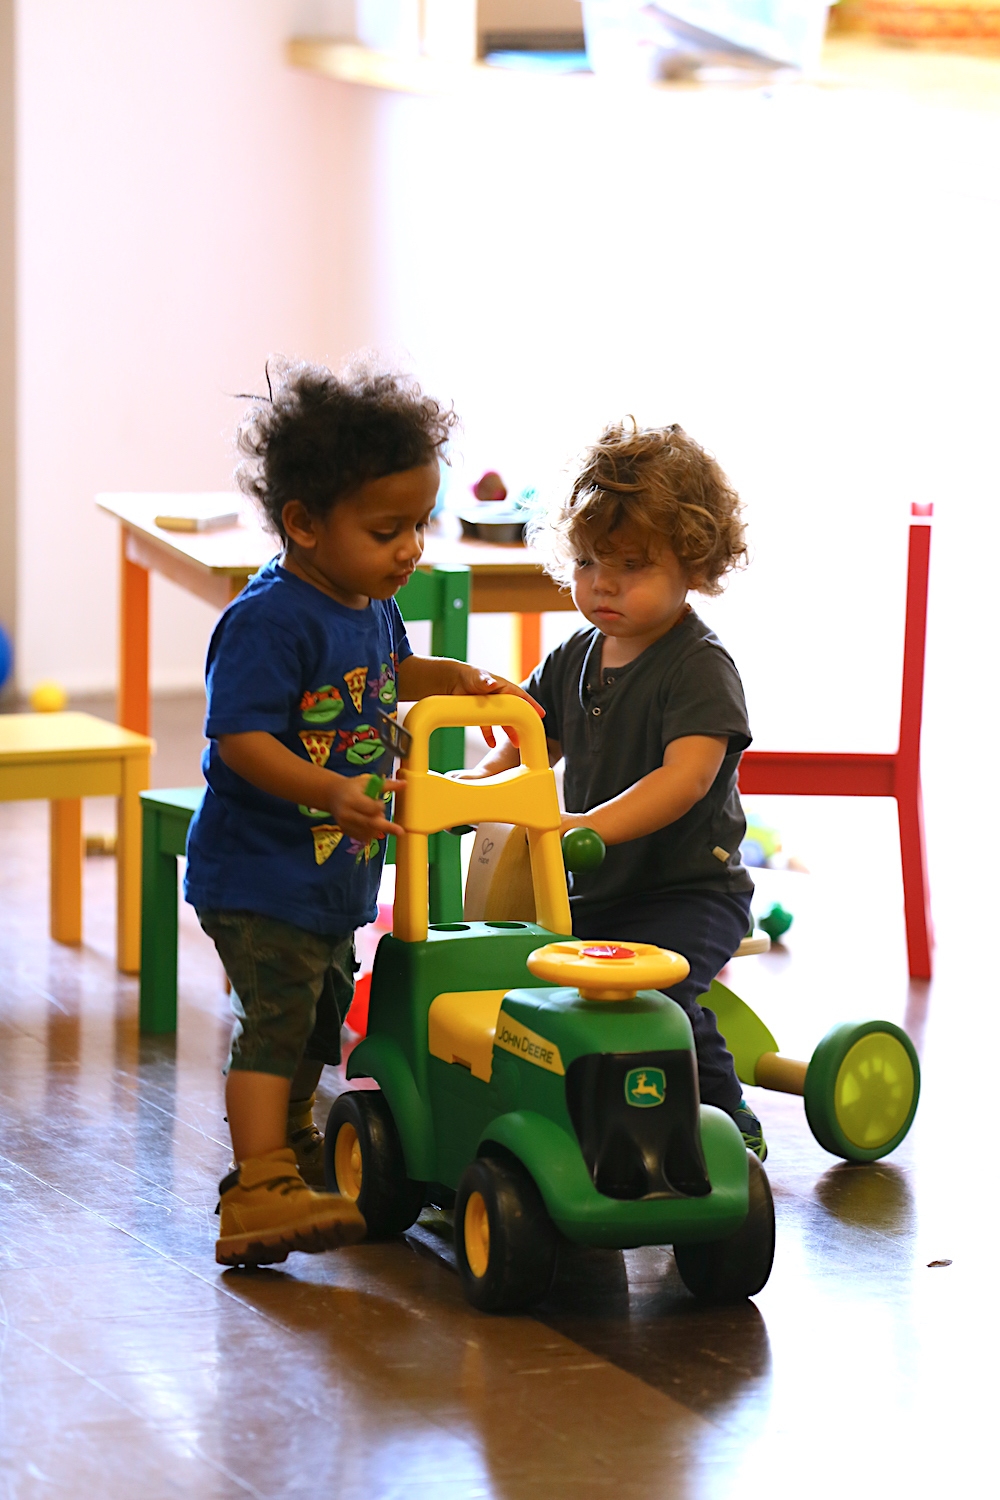 Two toddlers playing with a toy riding tractor